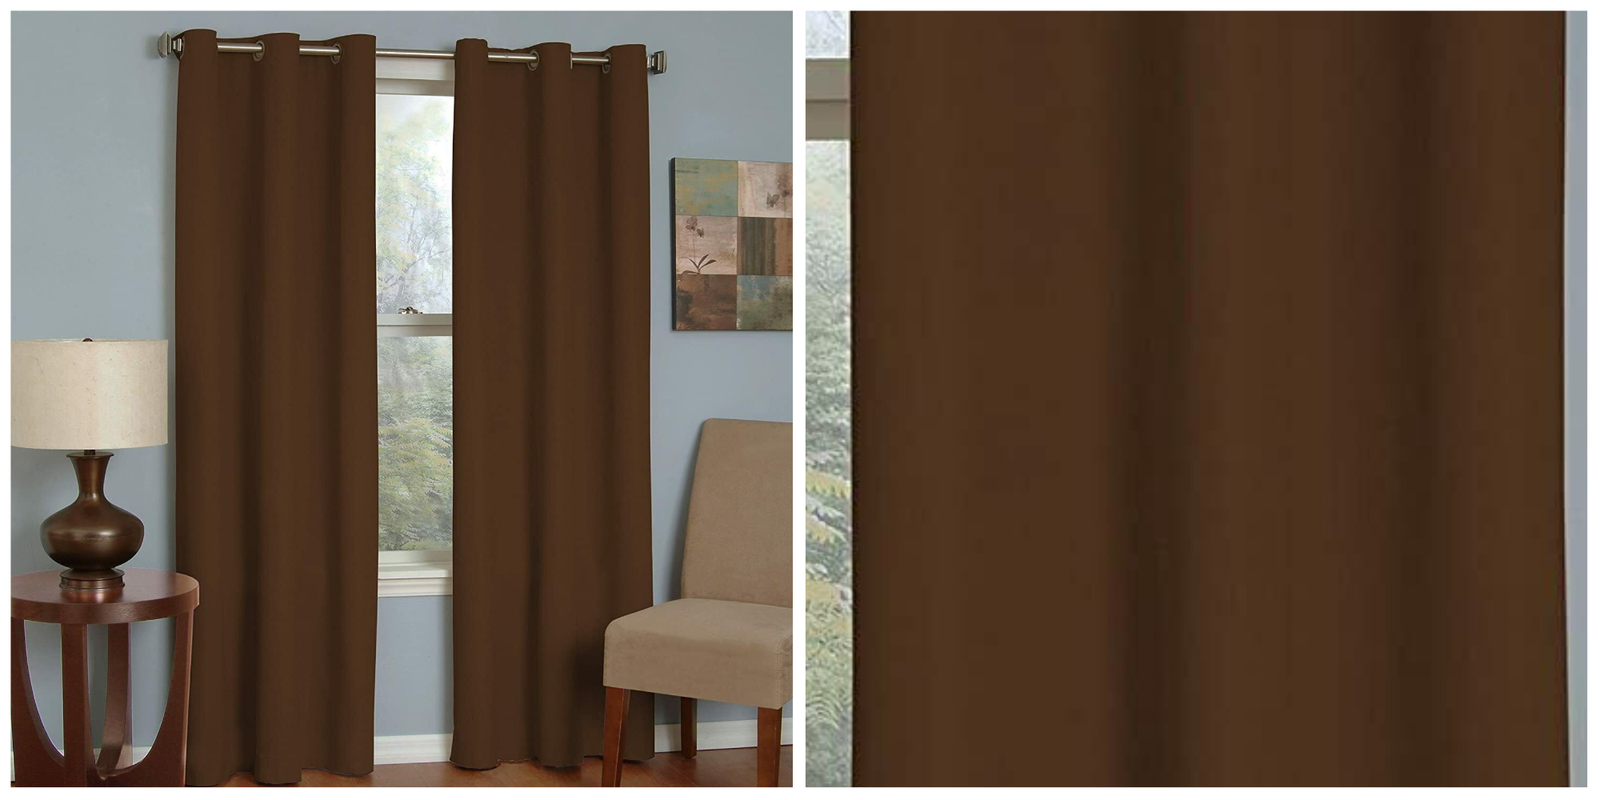 100% Thermal Blackout Window Curtains - 84" Standard - Savory Chocolate - P02 - $45.07